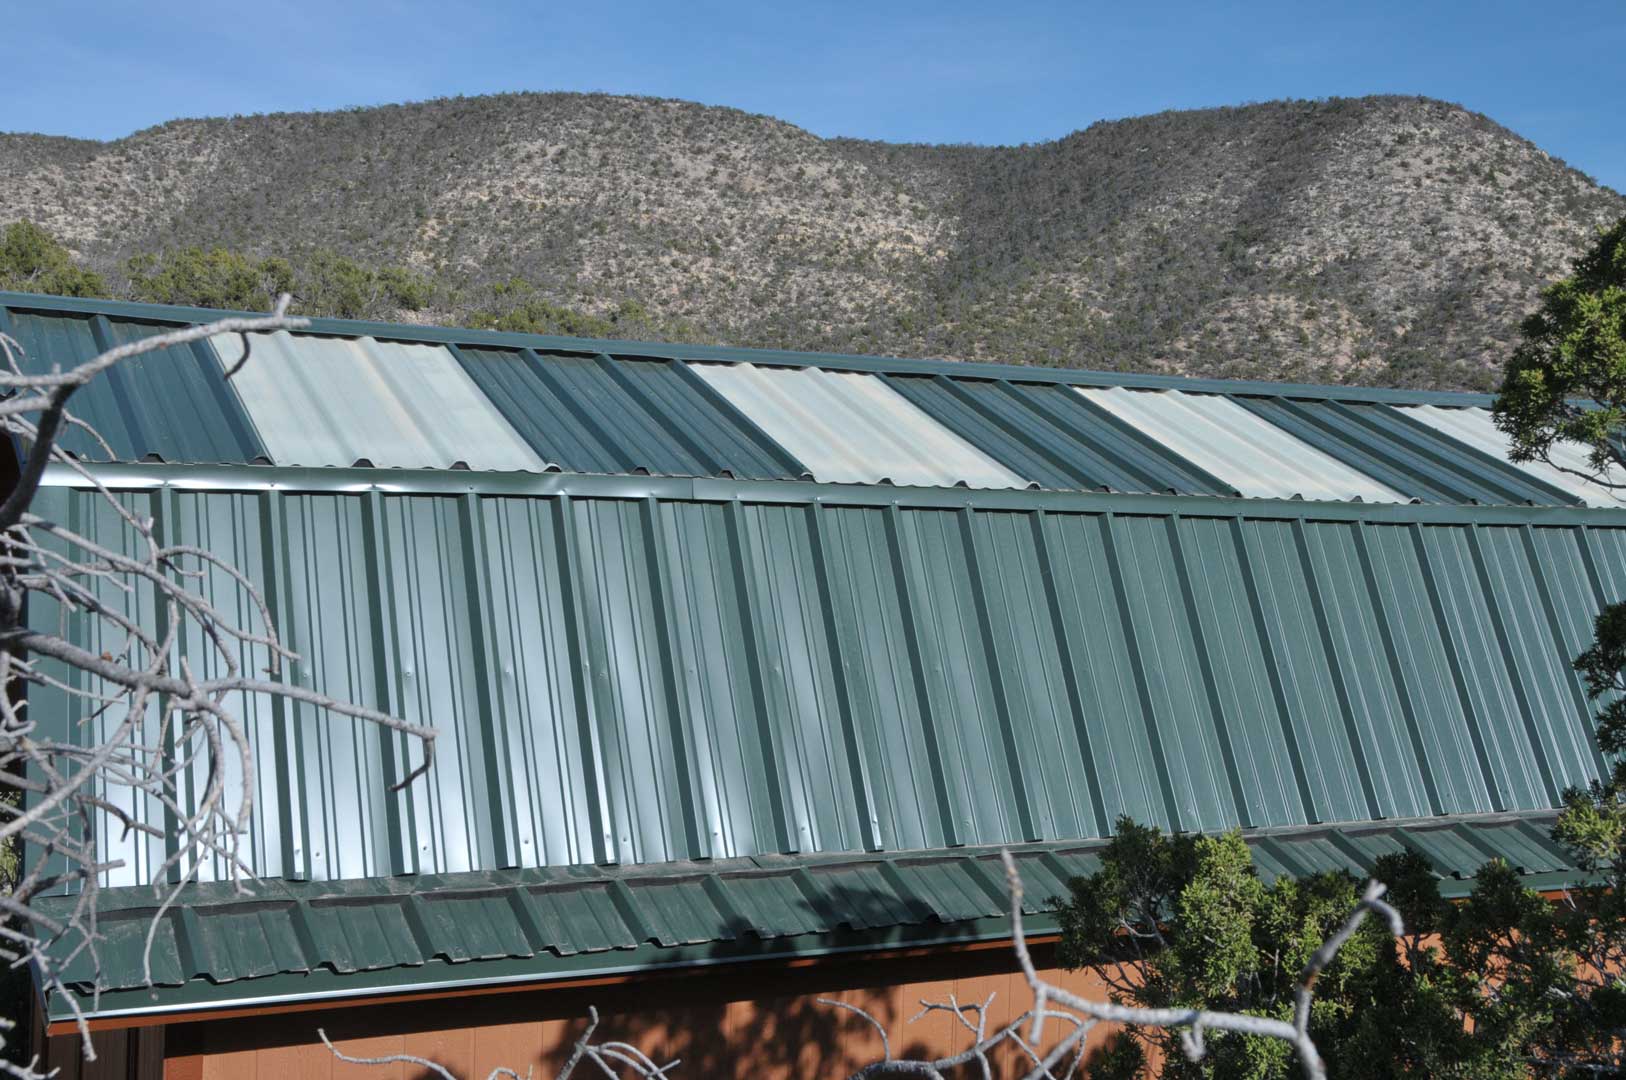 How To Install A Metal Roof Instead Of Shingles On Your Shed?